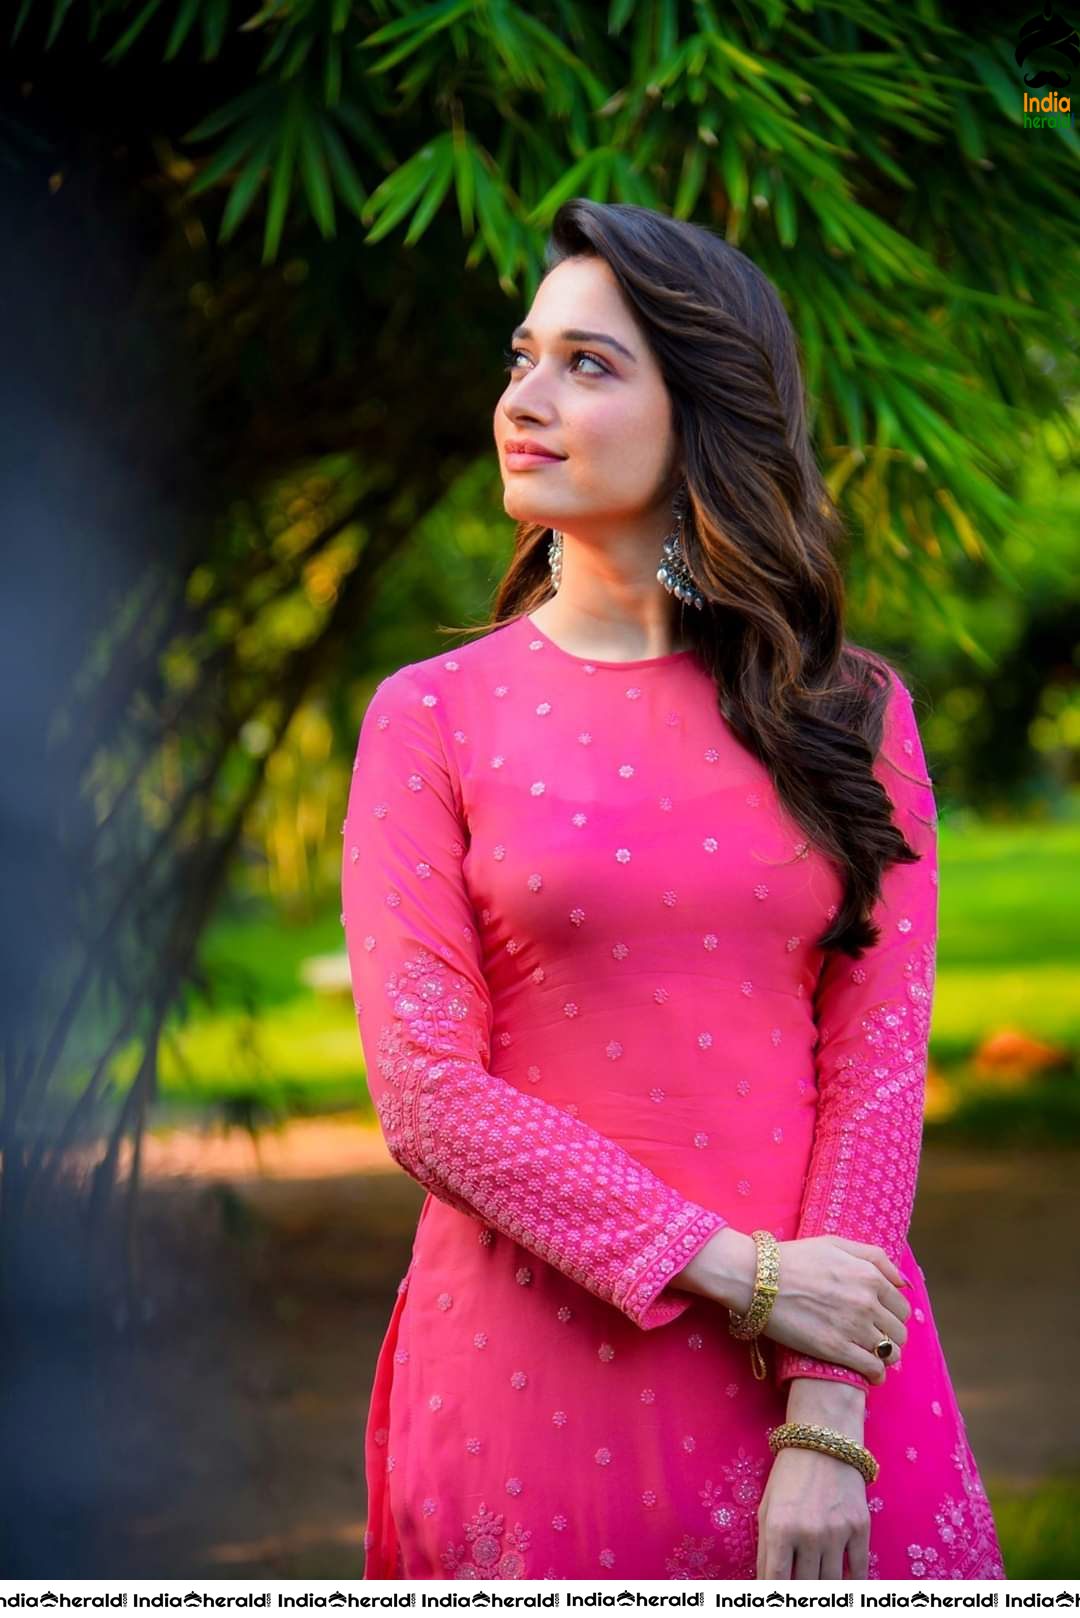 Milky White Beauty Tamannaah Hot and Tempting Photos Collections Set 1